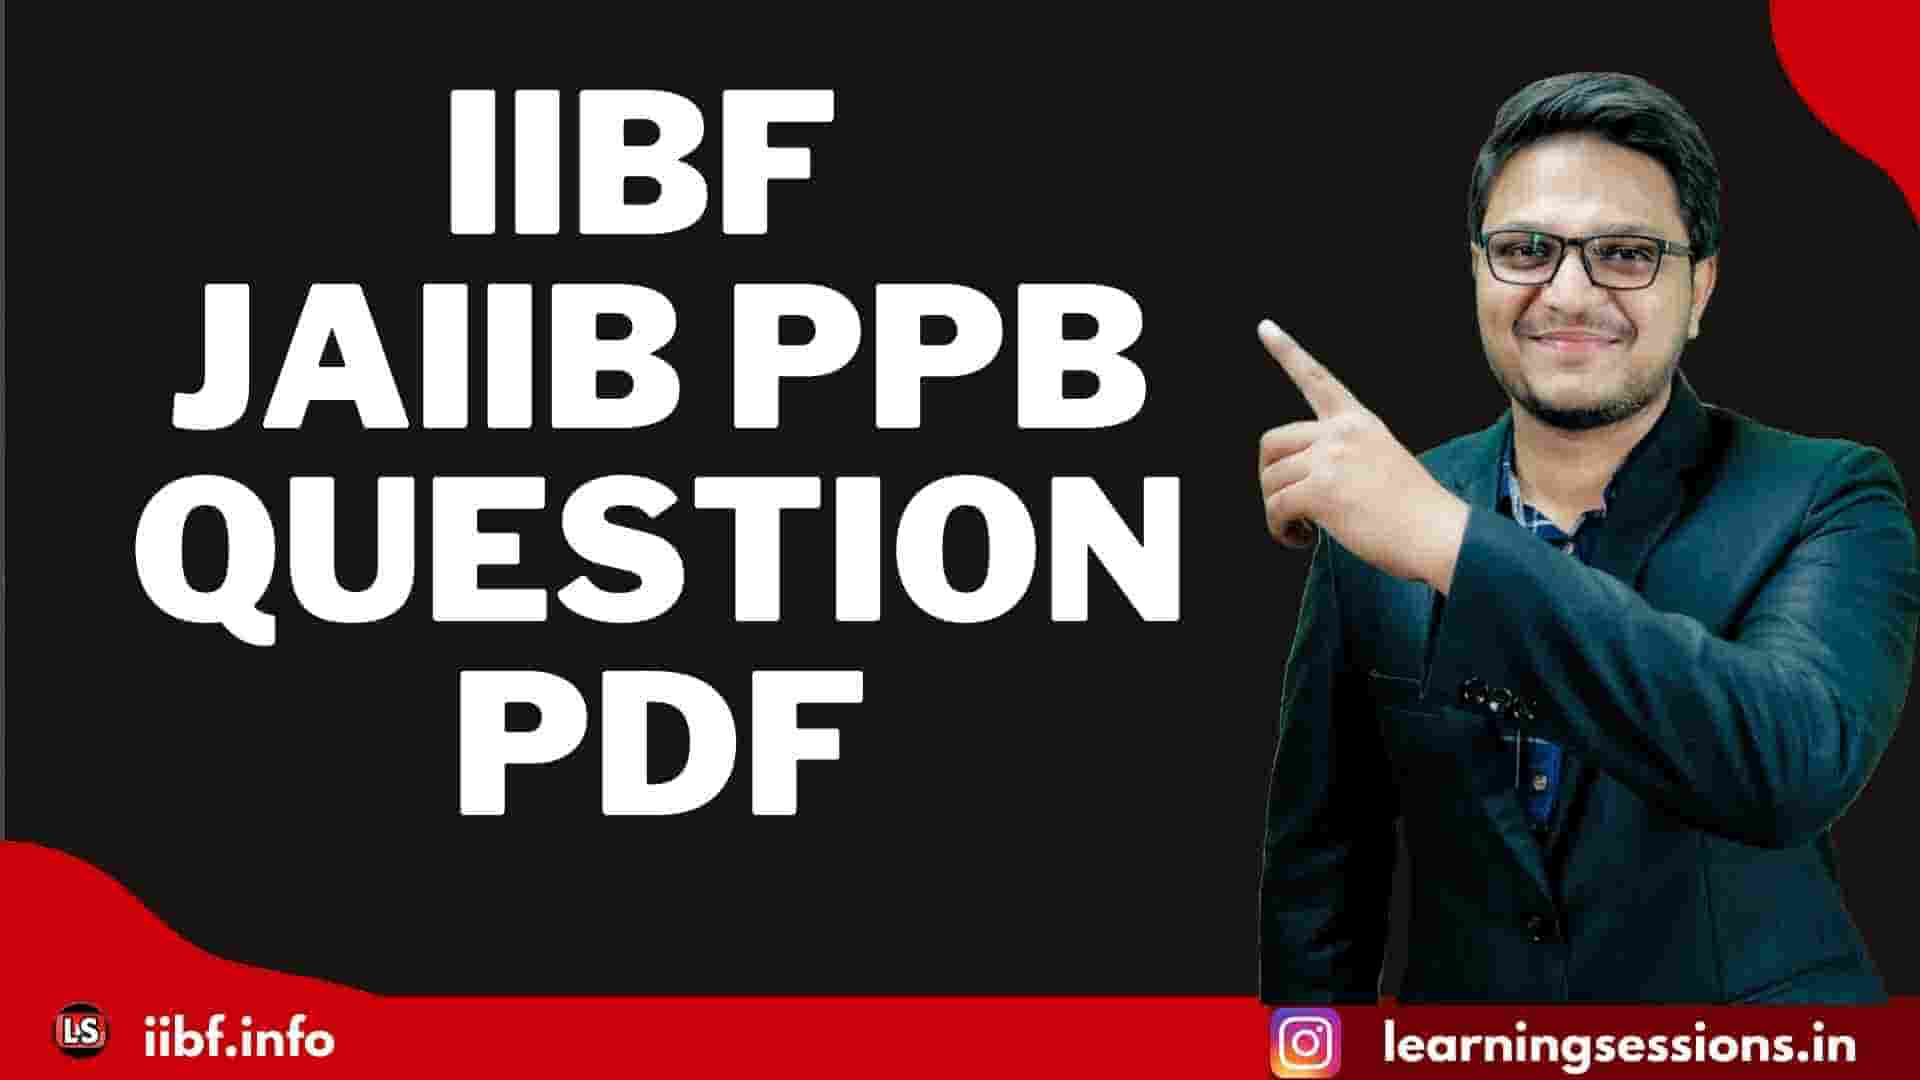 IIBF JAIIB PPB QUESTION PDF - principles and practices of banking